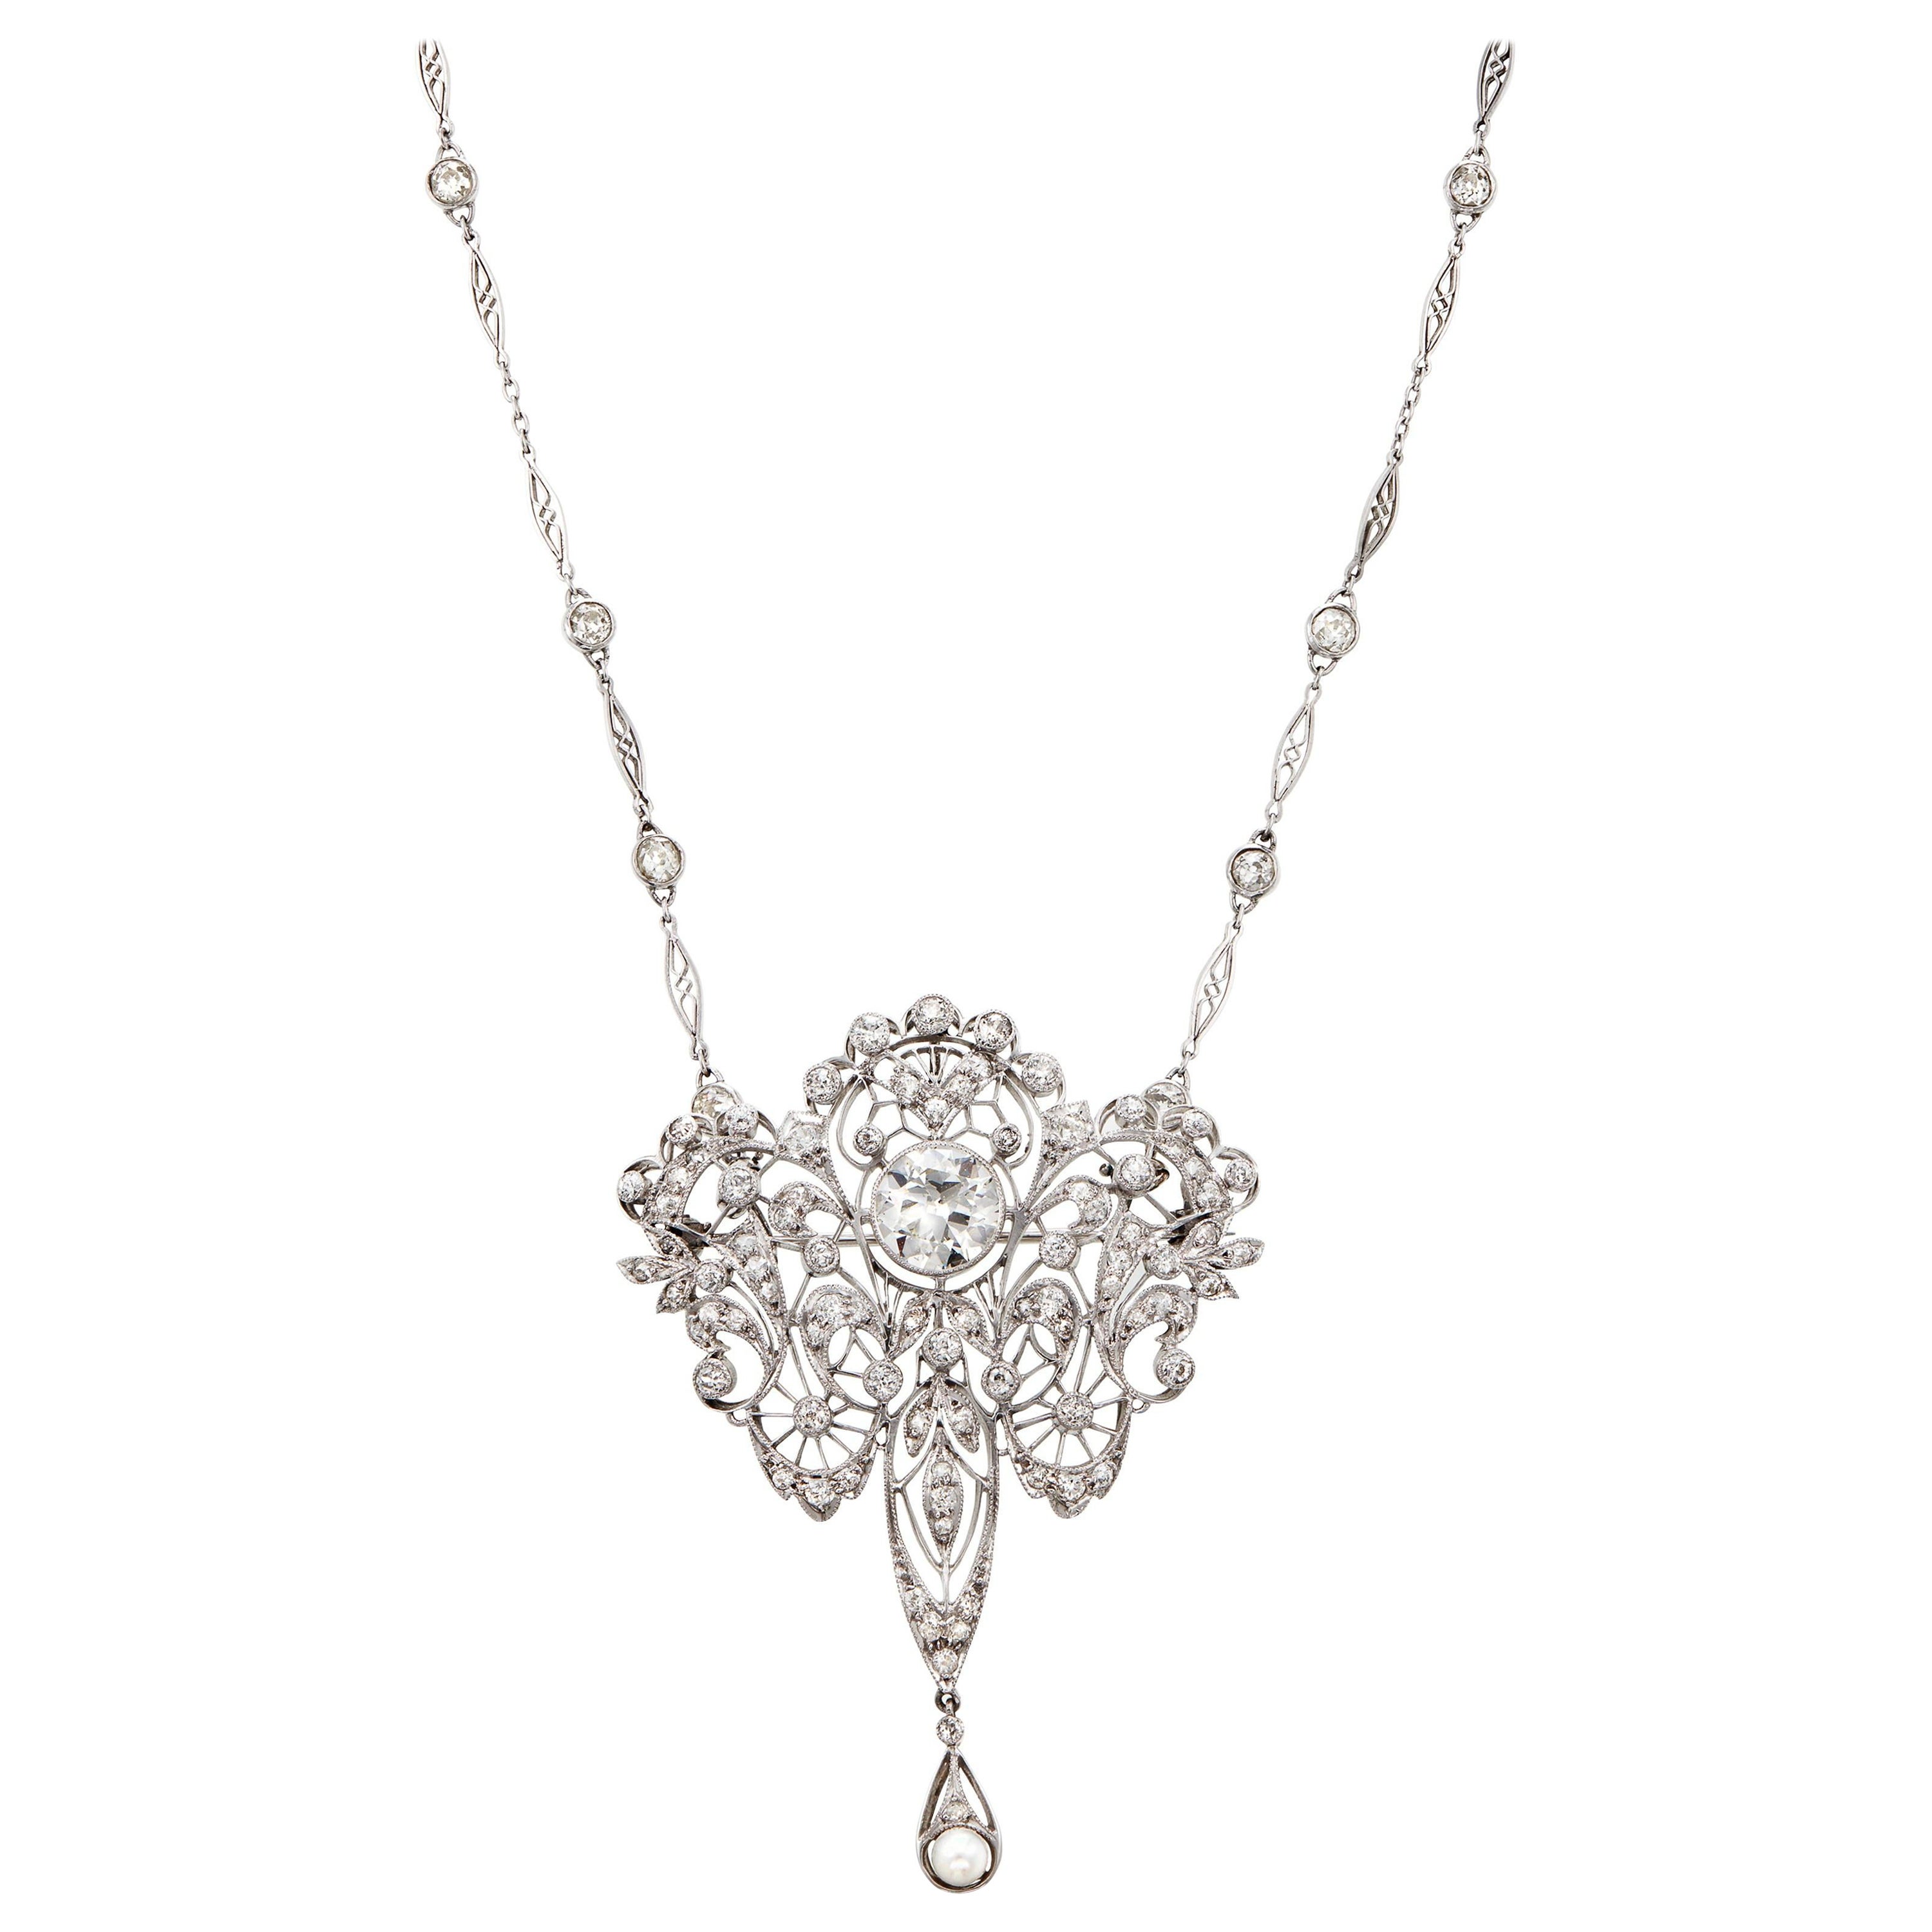 Incredible Belle Époque Diamond Pendant Necklace and Brooch For Sale